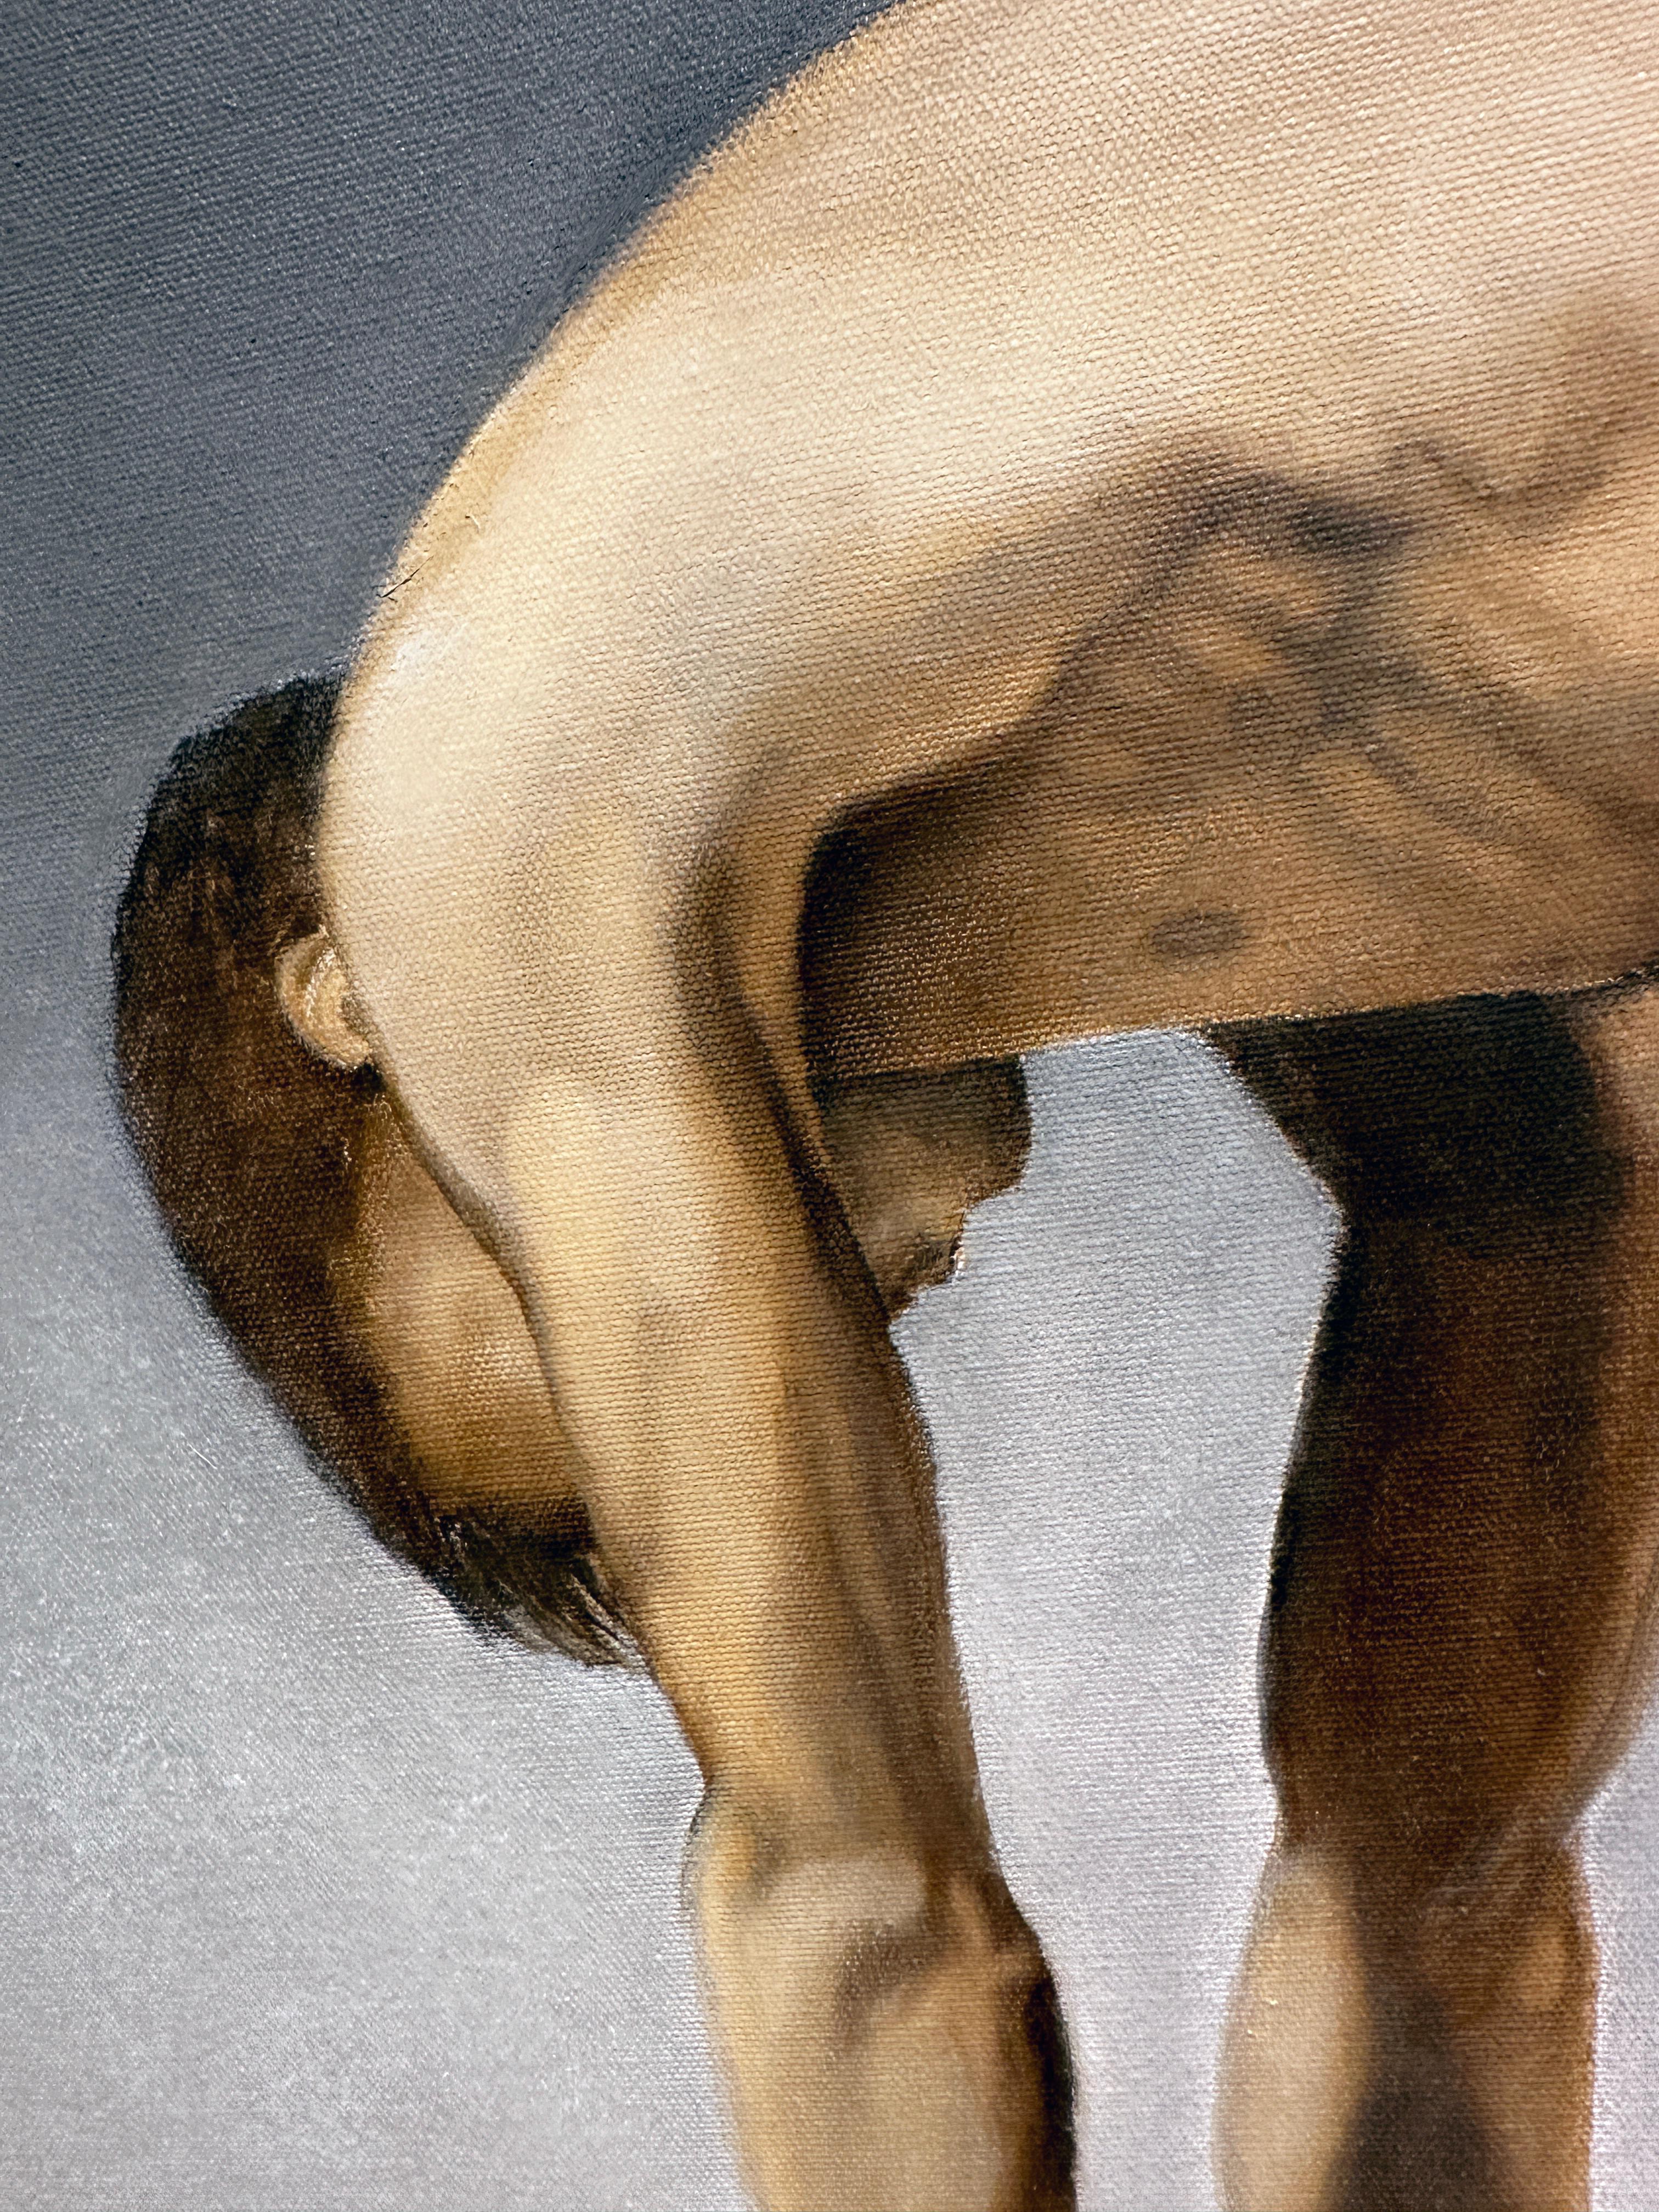 Hover - Male Nude Suspended in Air, Side View, Original Oil on Canvas For Sale 3